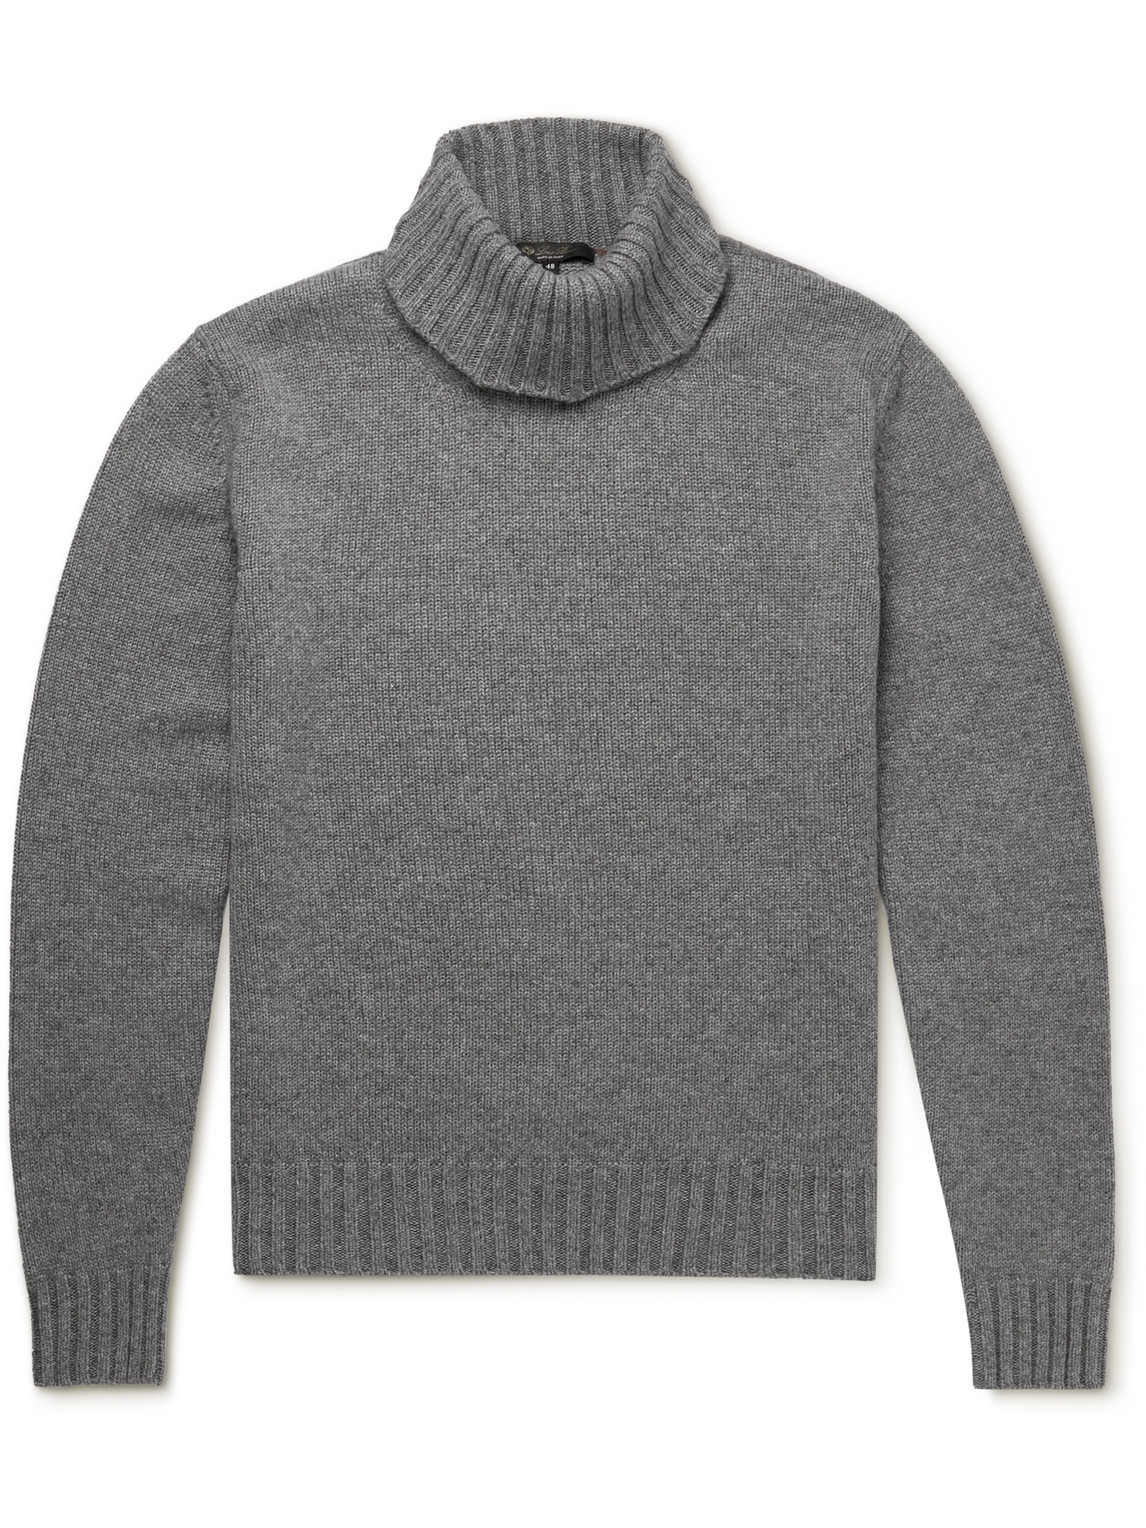 Grafton Baby Cashmere Rollneck Sweater